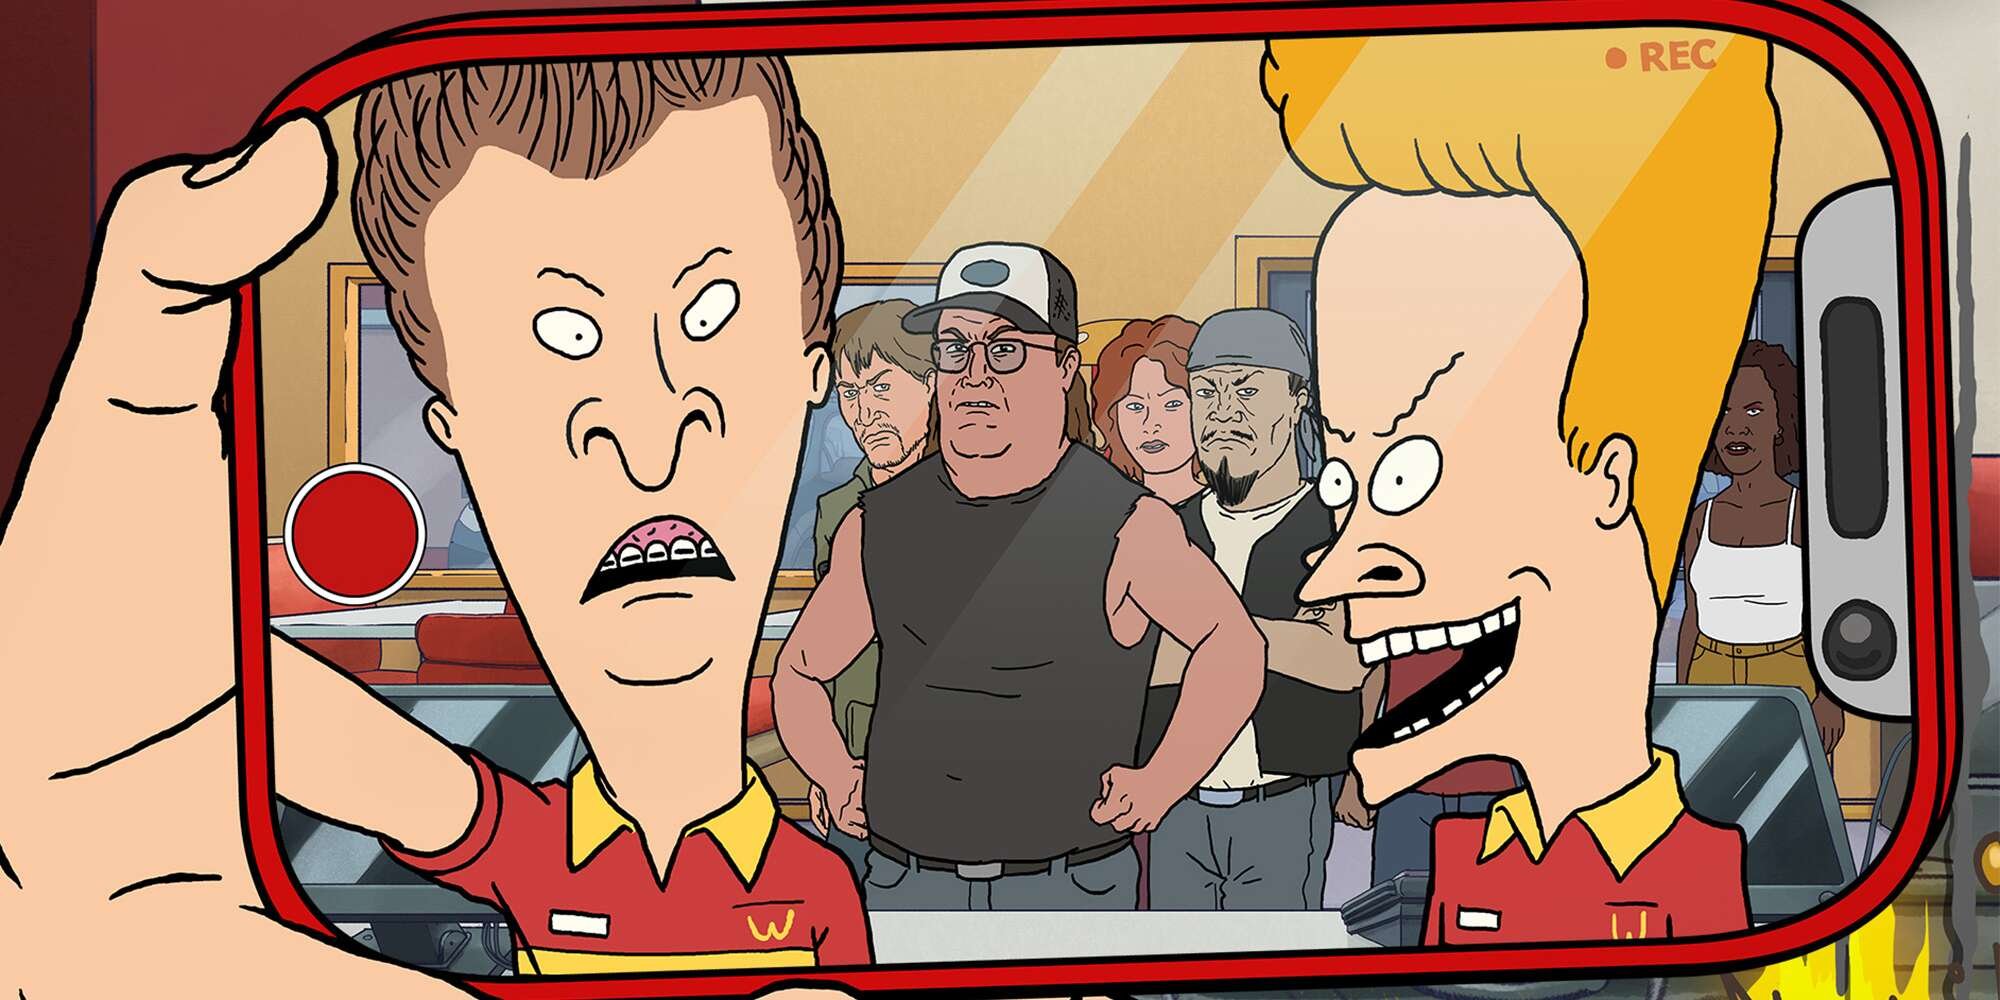 Mike Judge on bringing Beavis and Butt-Head into middle age for new show: 'They just dumb old guys'